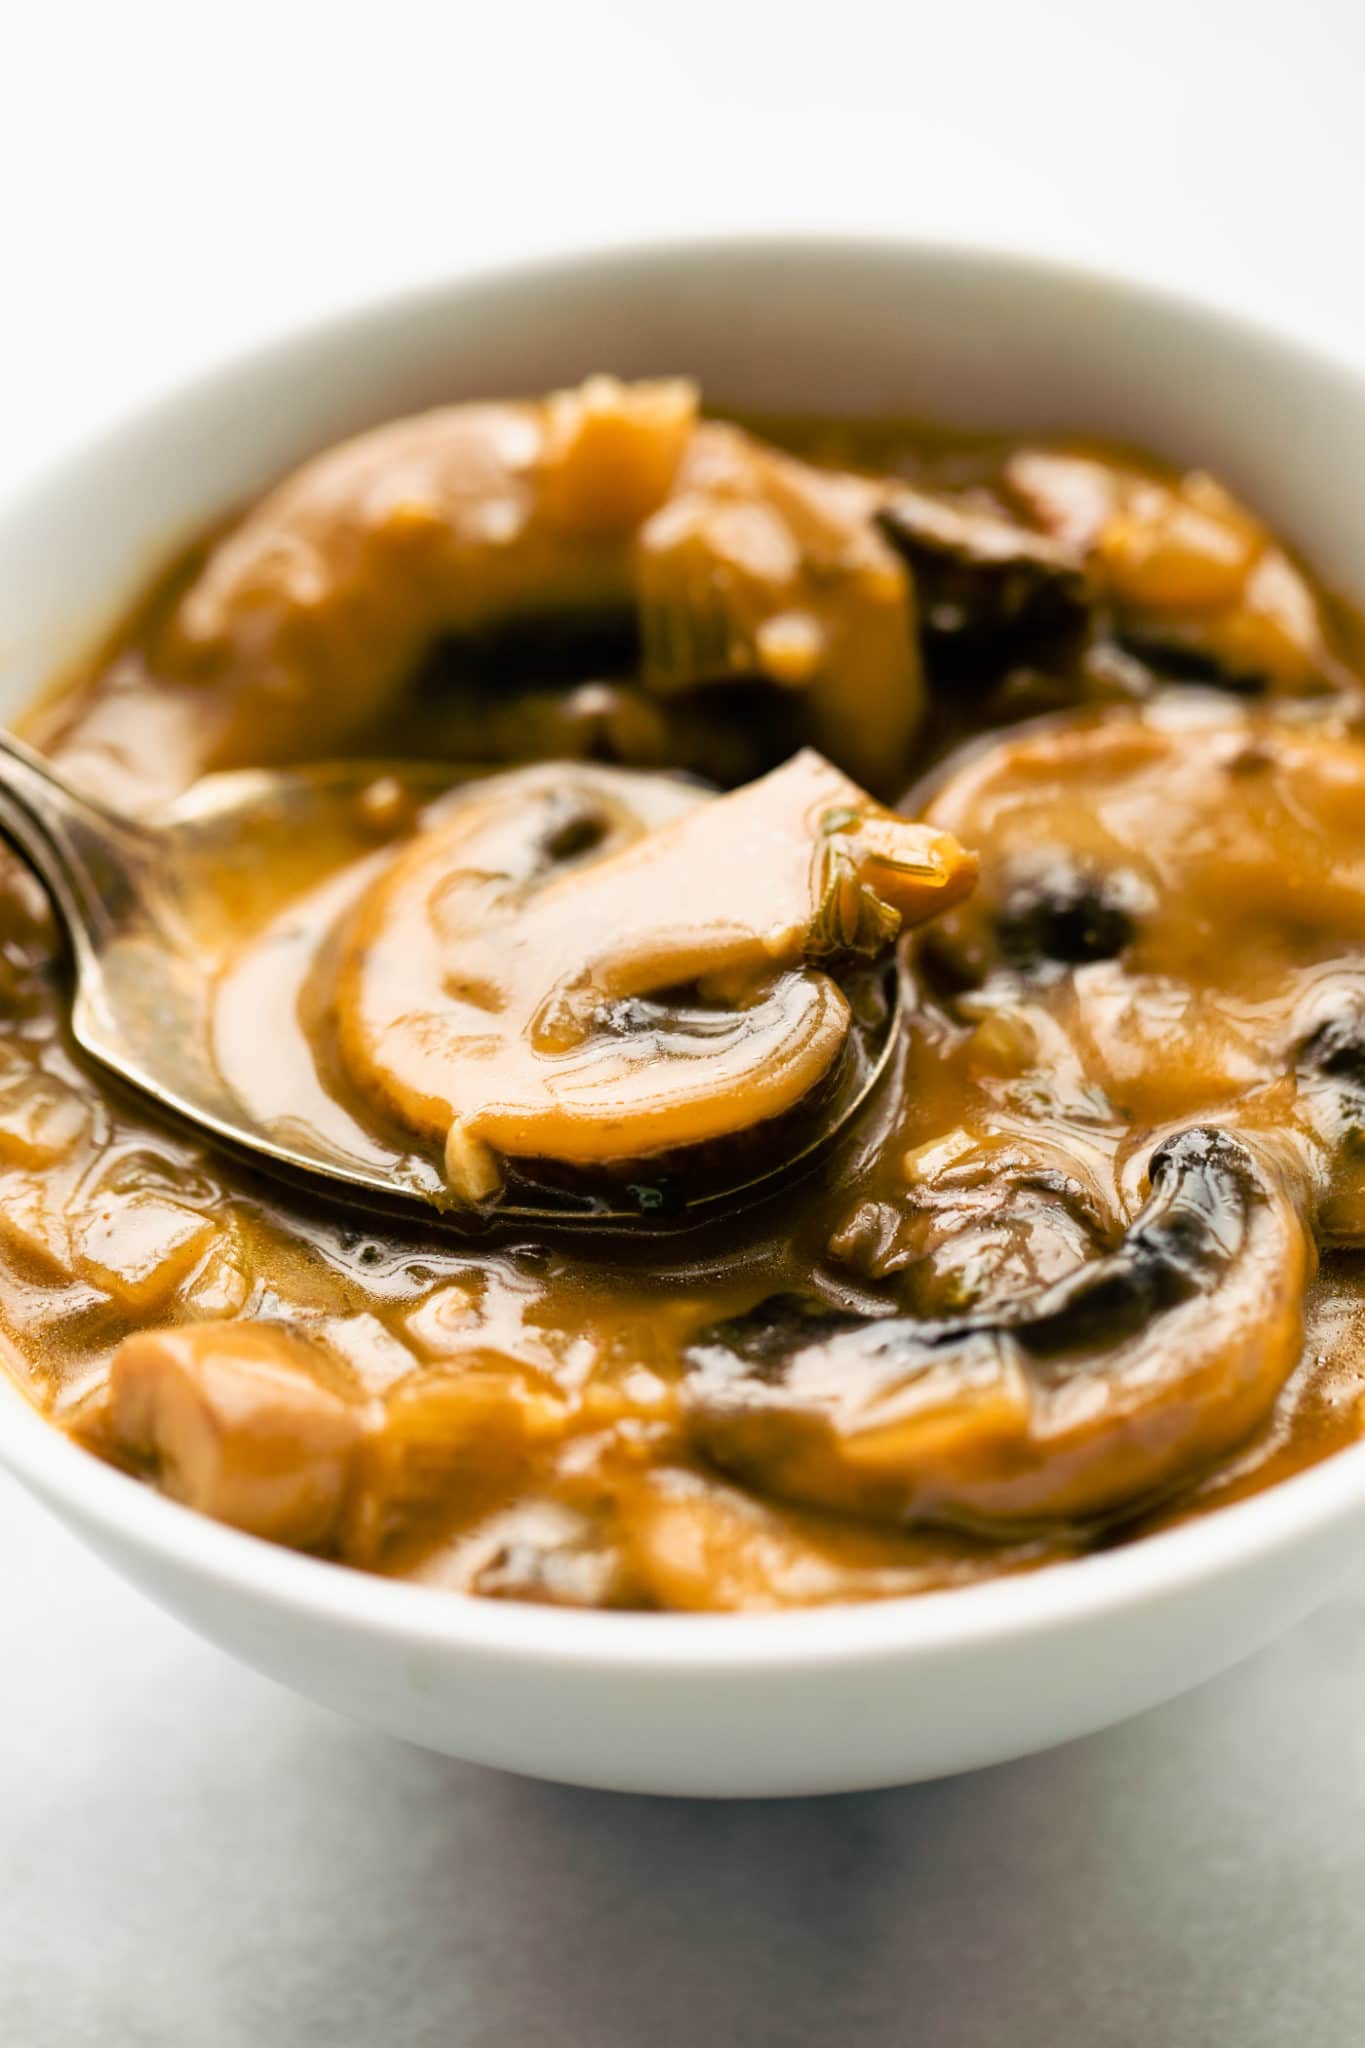 Close up view of a spoon holding a sliced mushroom in gravy over a small white bowl filled with vegan mushroom gravy.